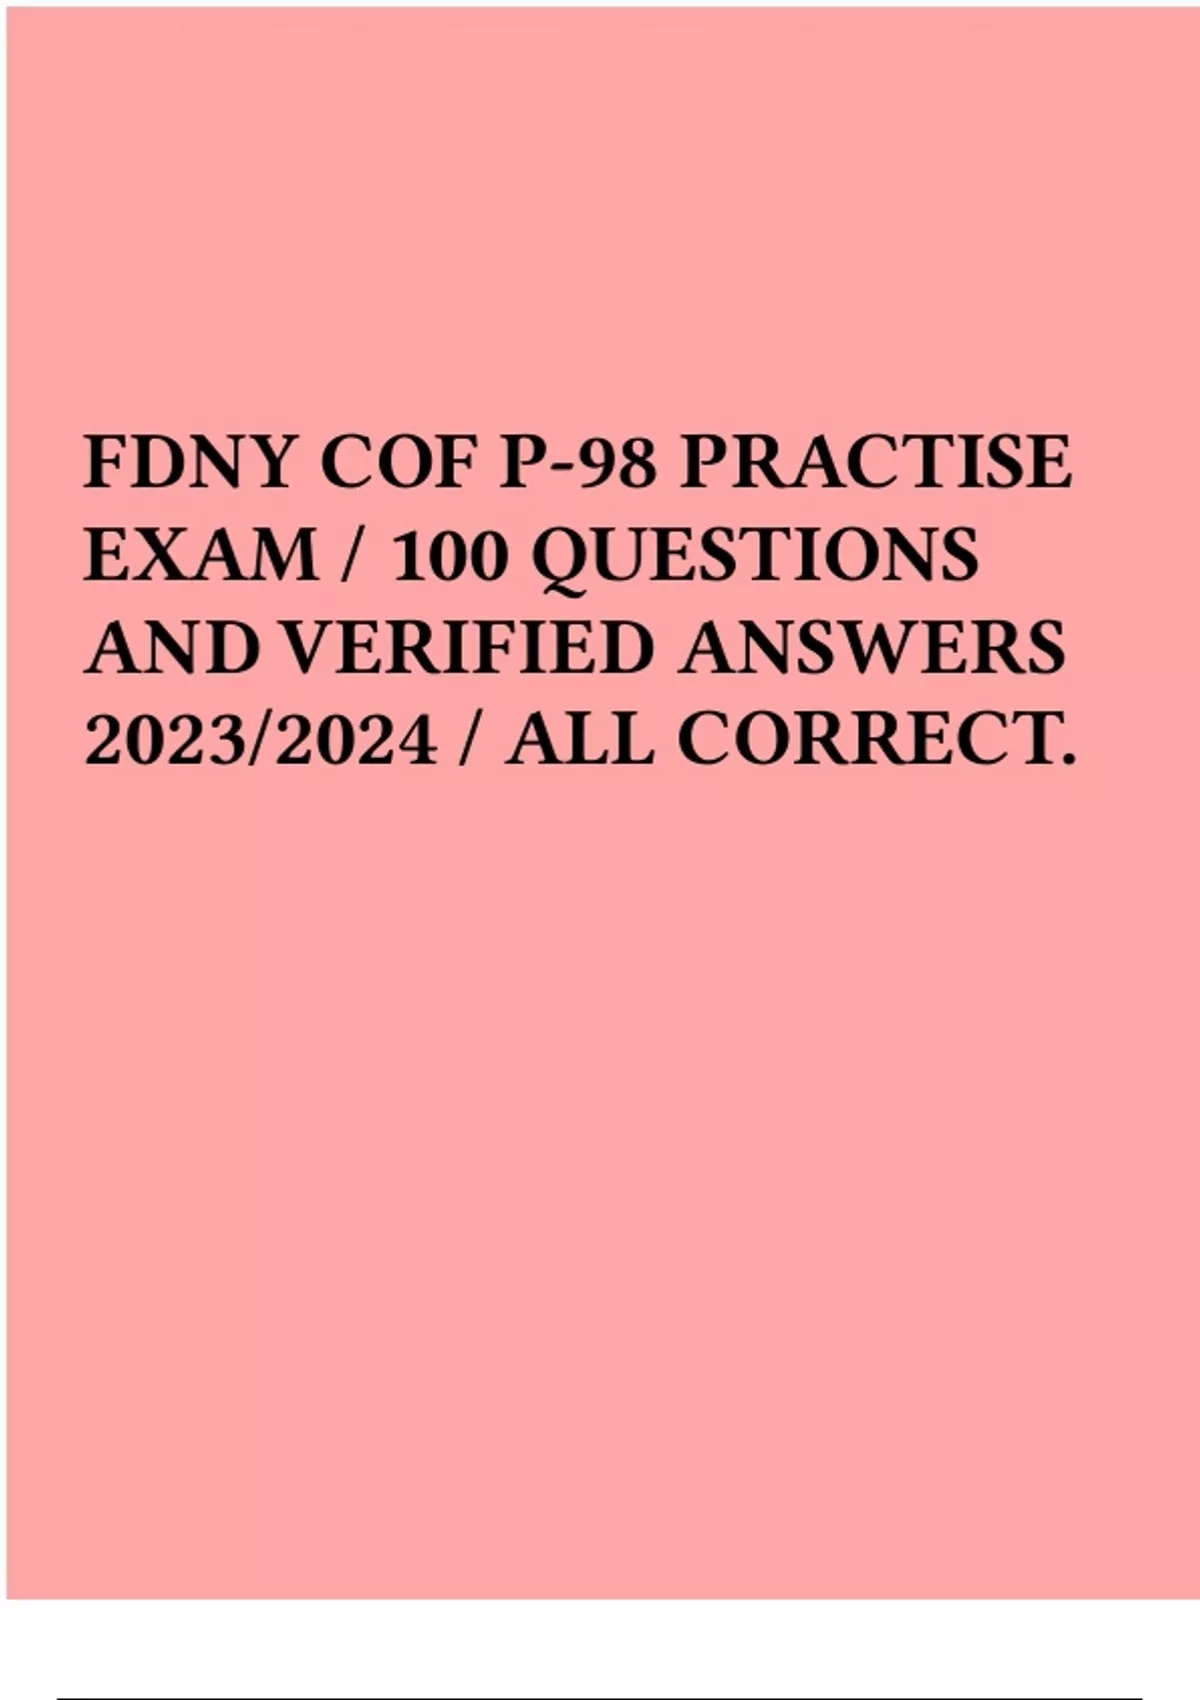 FDNY COF P98 PRACTISE EXAM / 100 QUESTIONS AND VERIFIED ANSWERS 2023